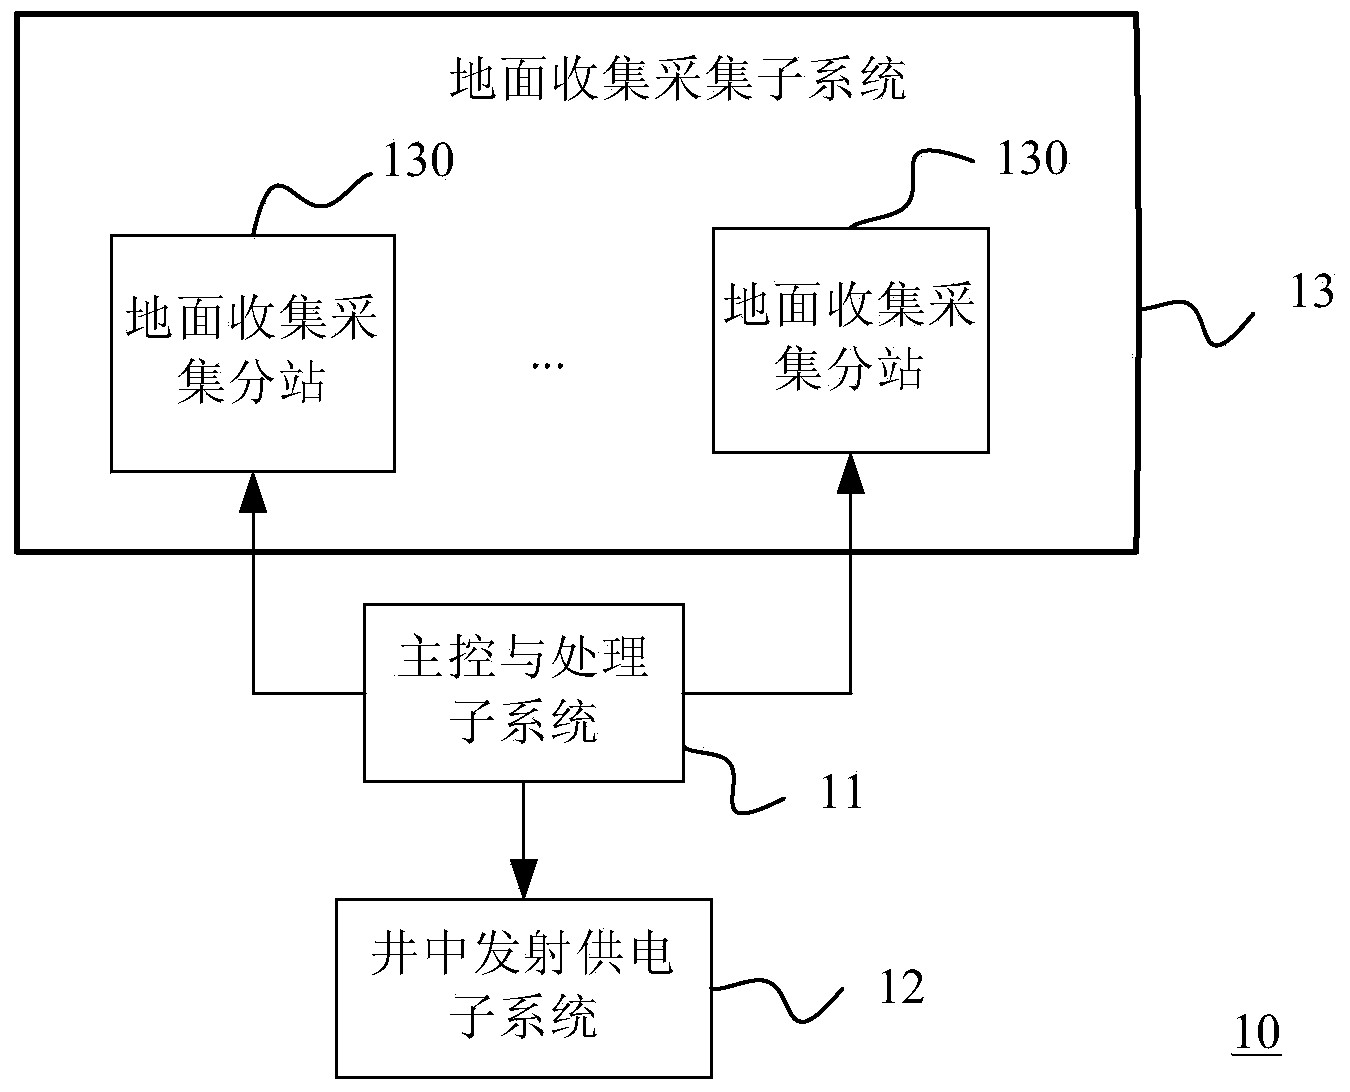 Well-to-ground joint electrical-method testing method and system